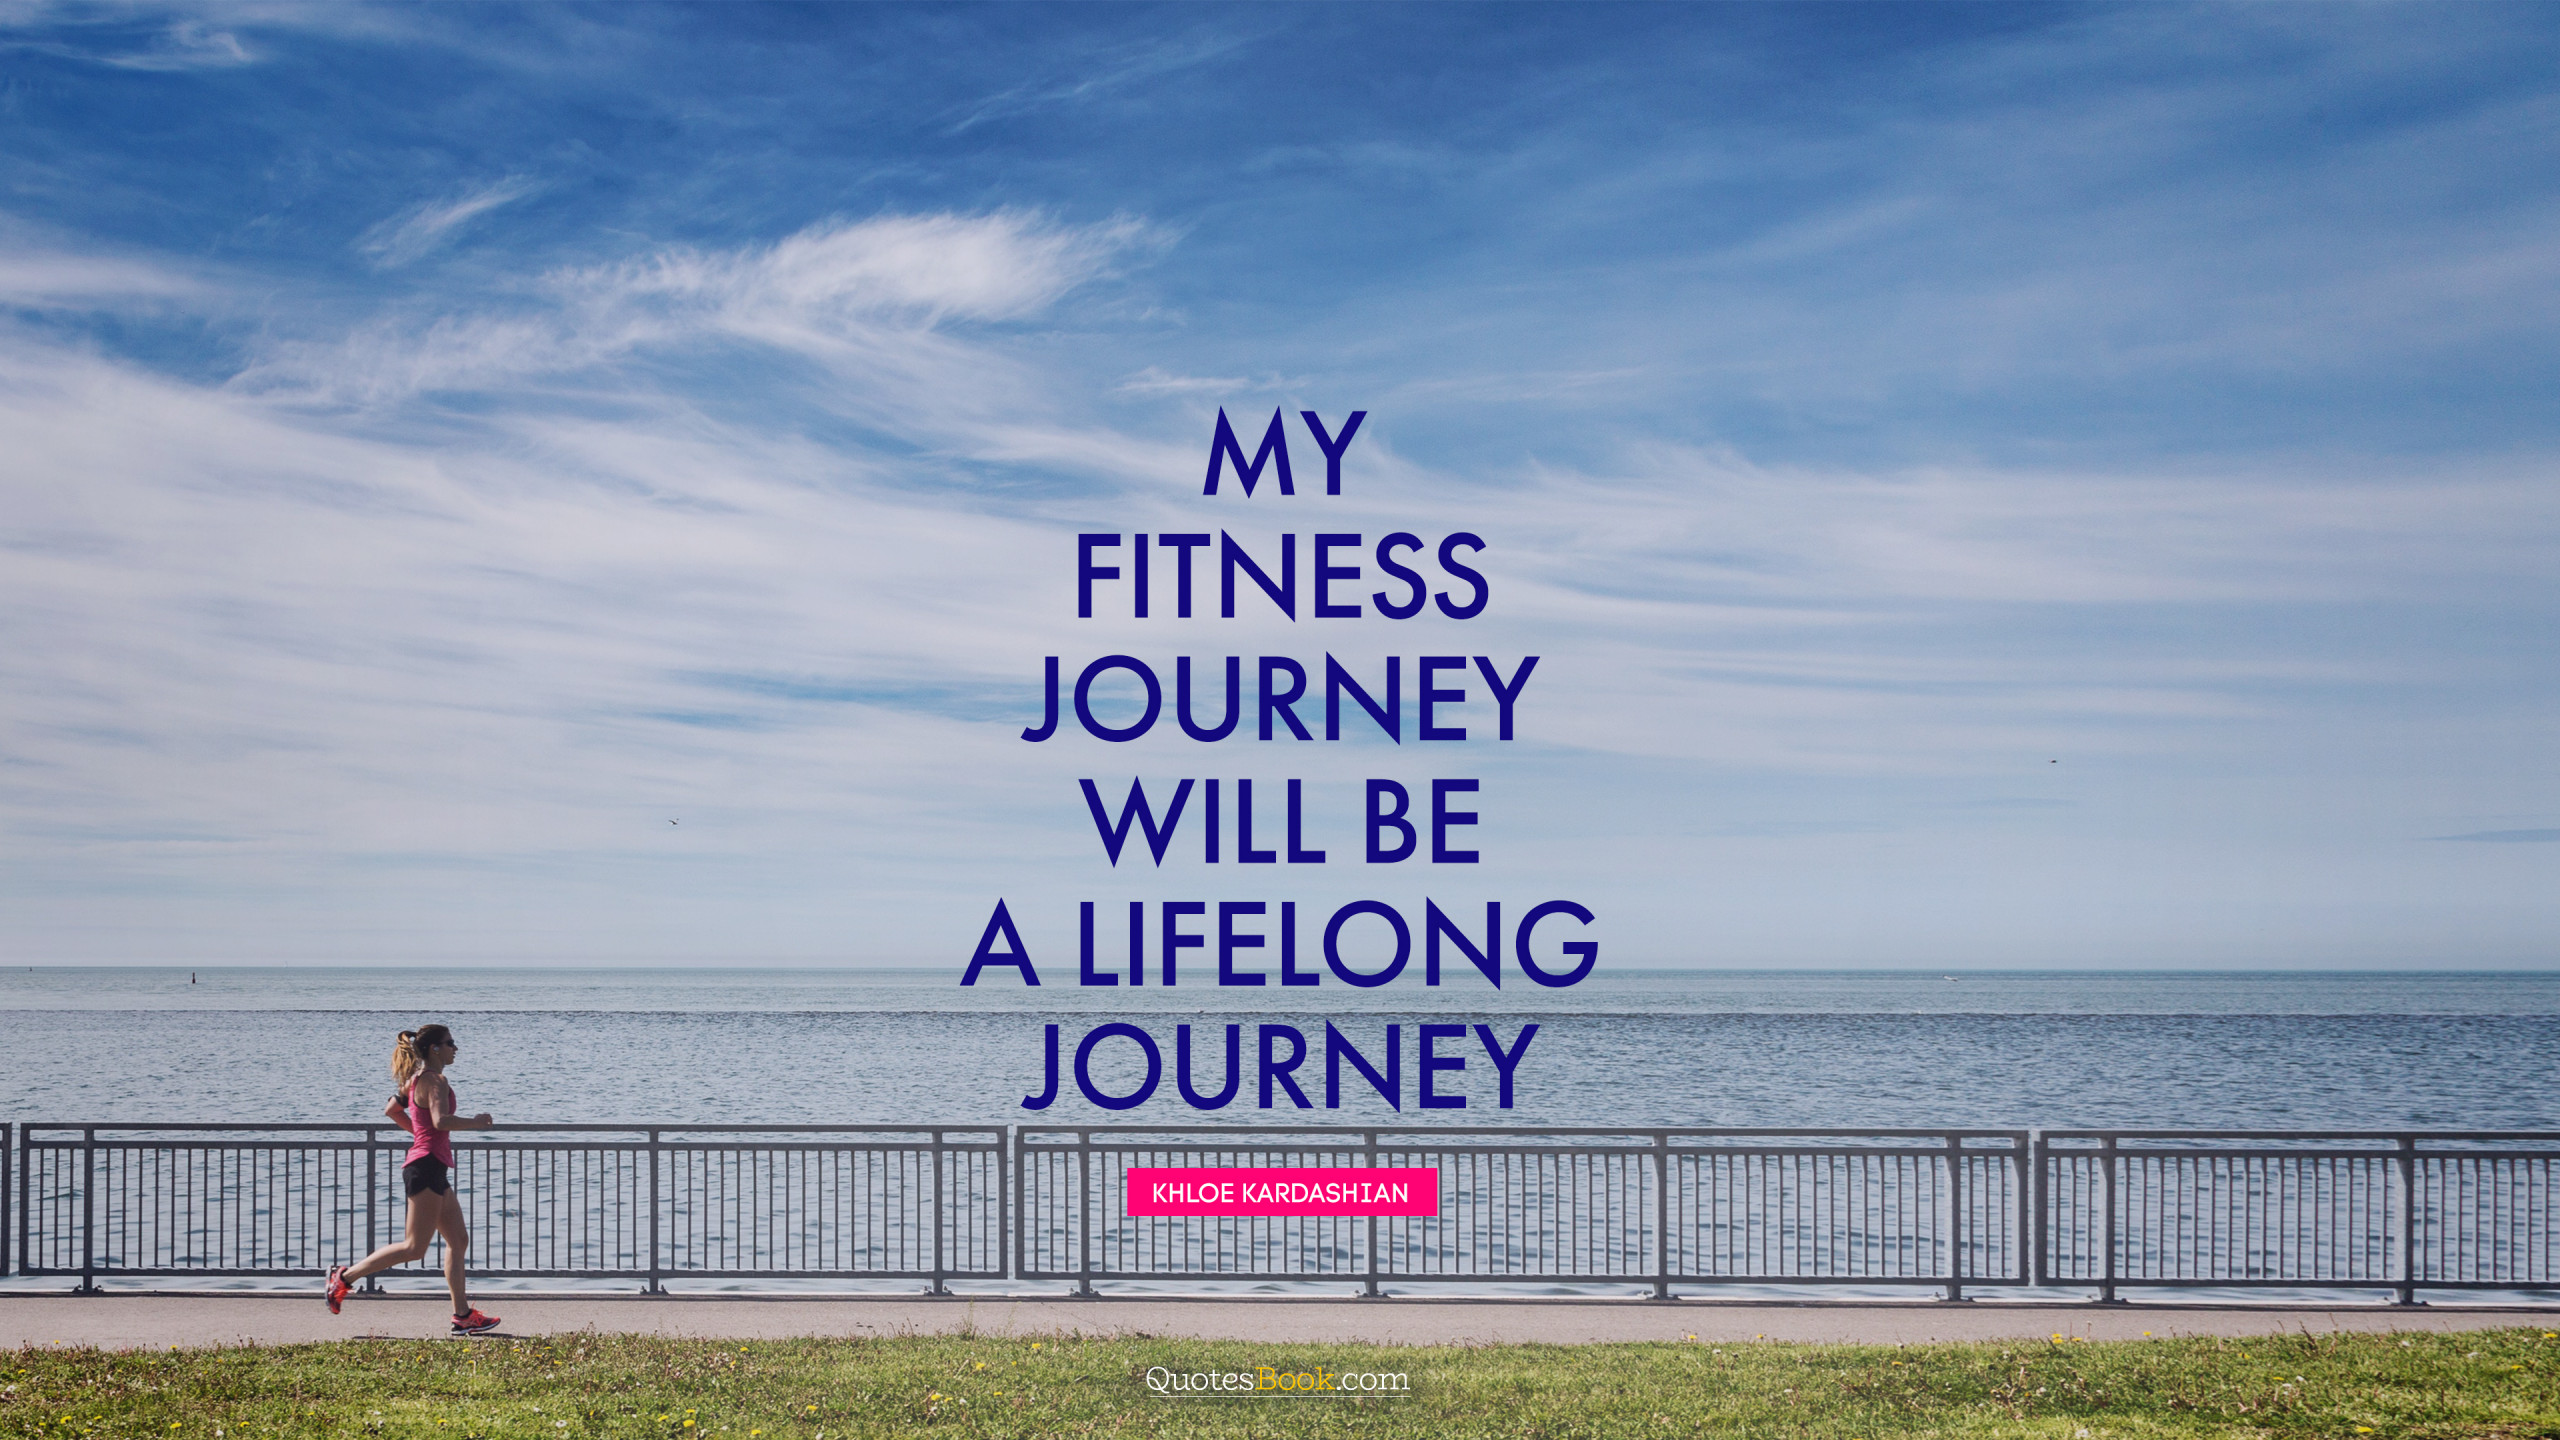 My fitness journey will be a lifelong journey. Quote by